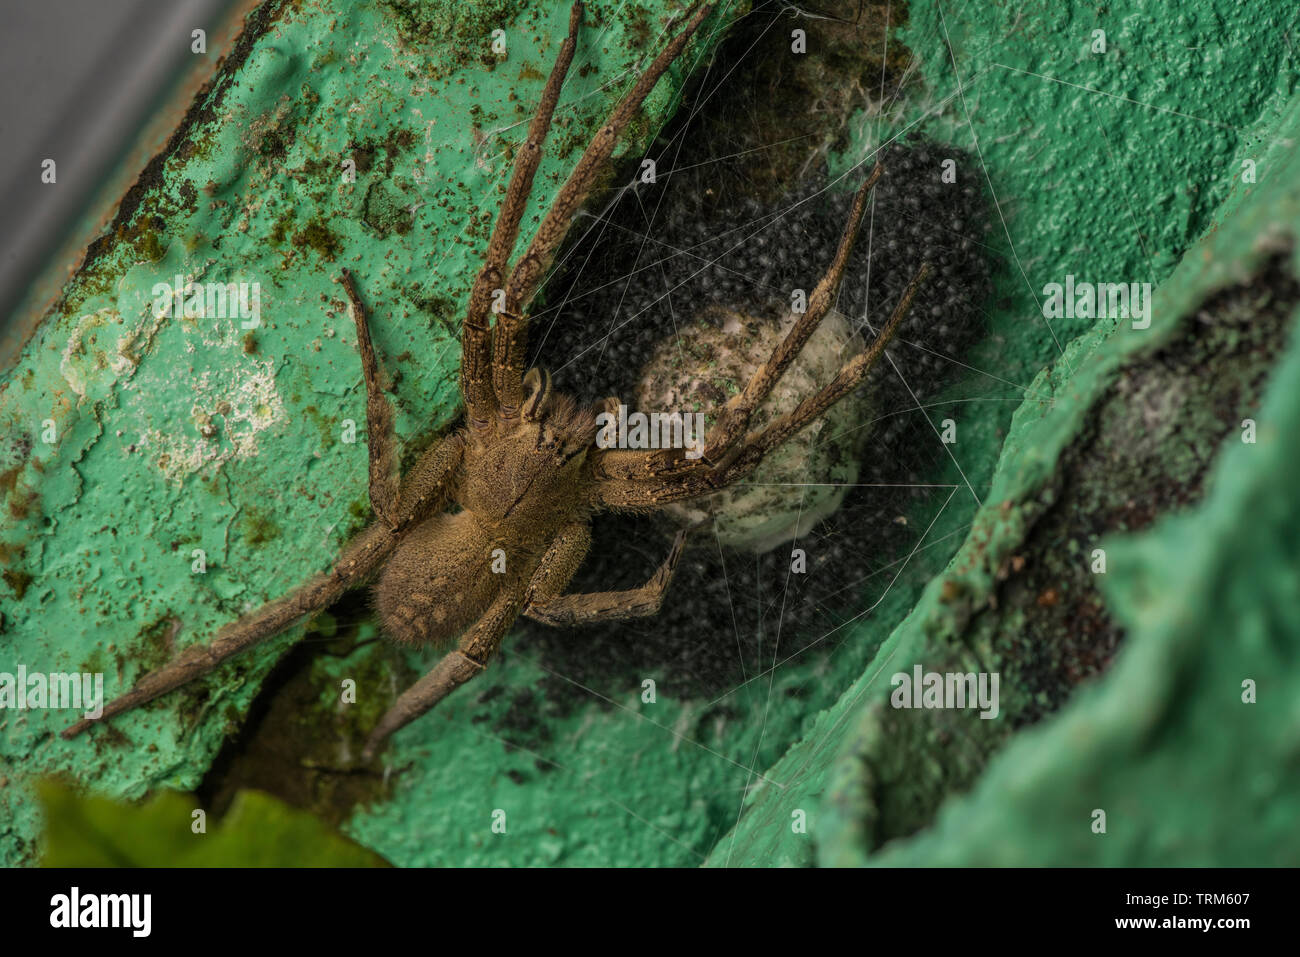 A dangerously venomous wandering spider (Phoneutria species) guarding an eggsack and its recently hatched young spiderlings which will soon disperse. Stock Photo